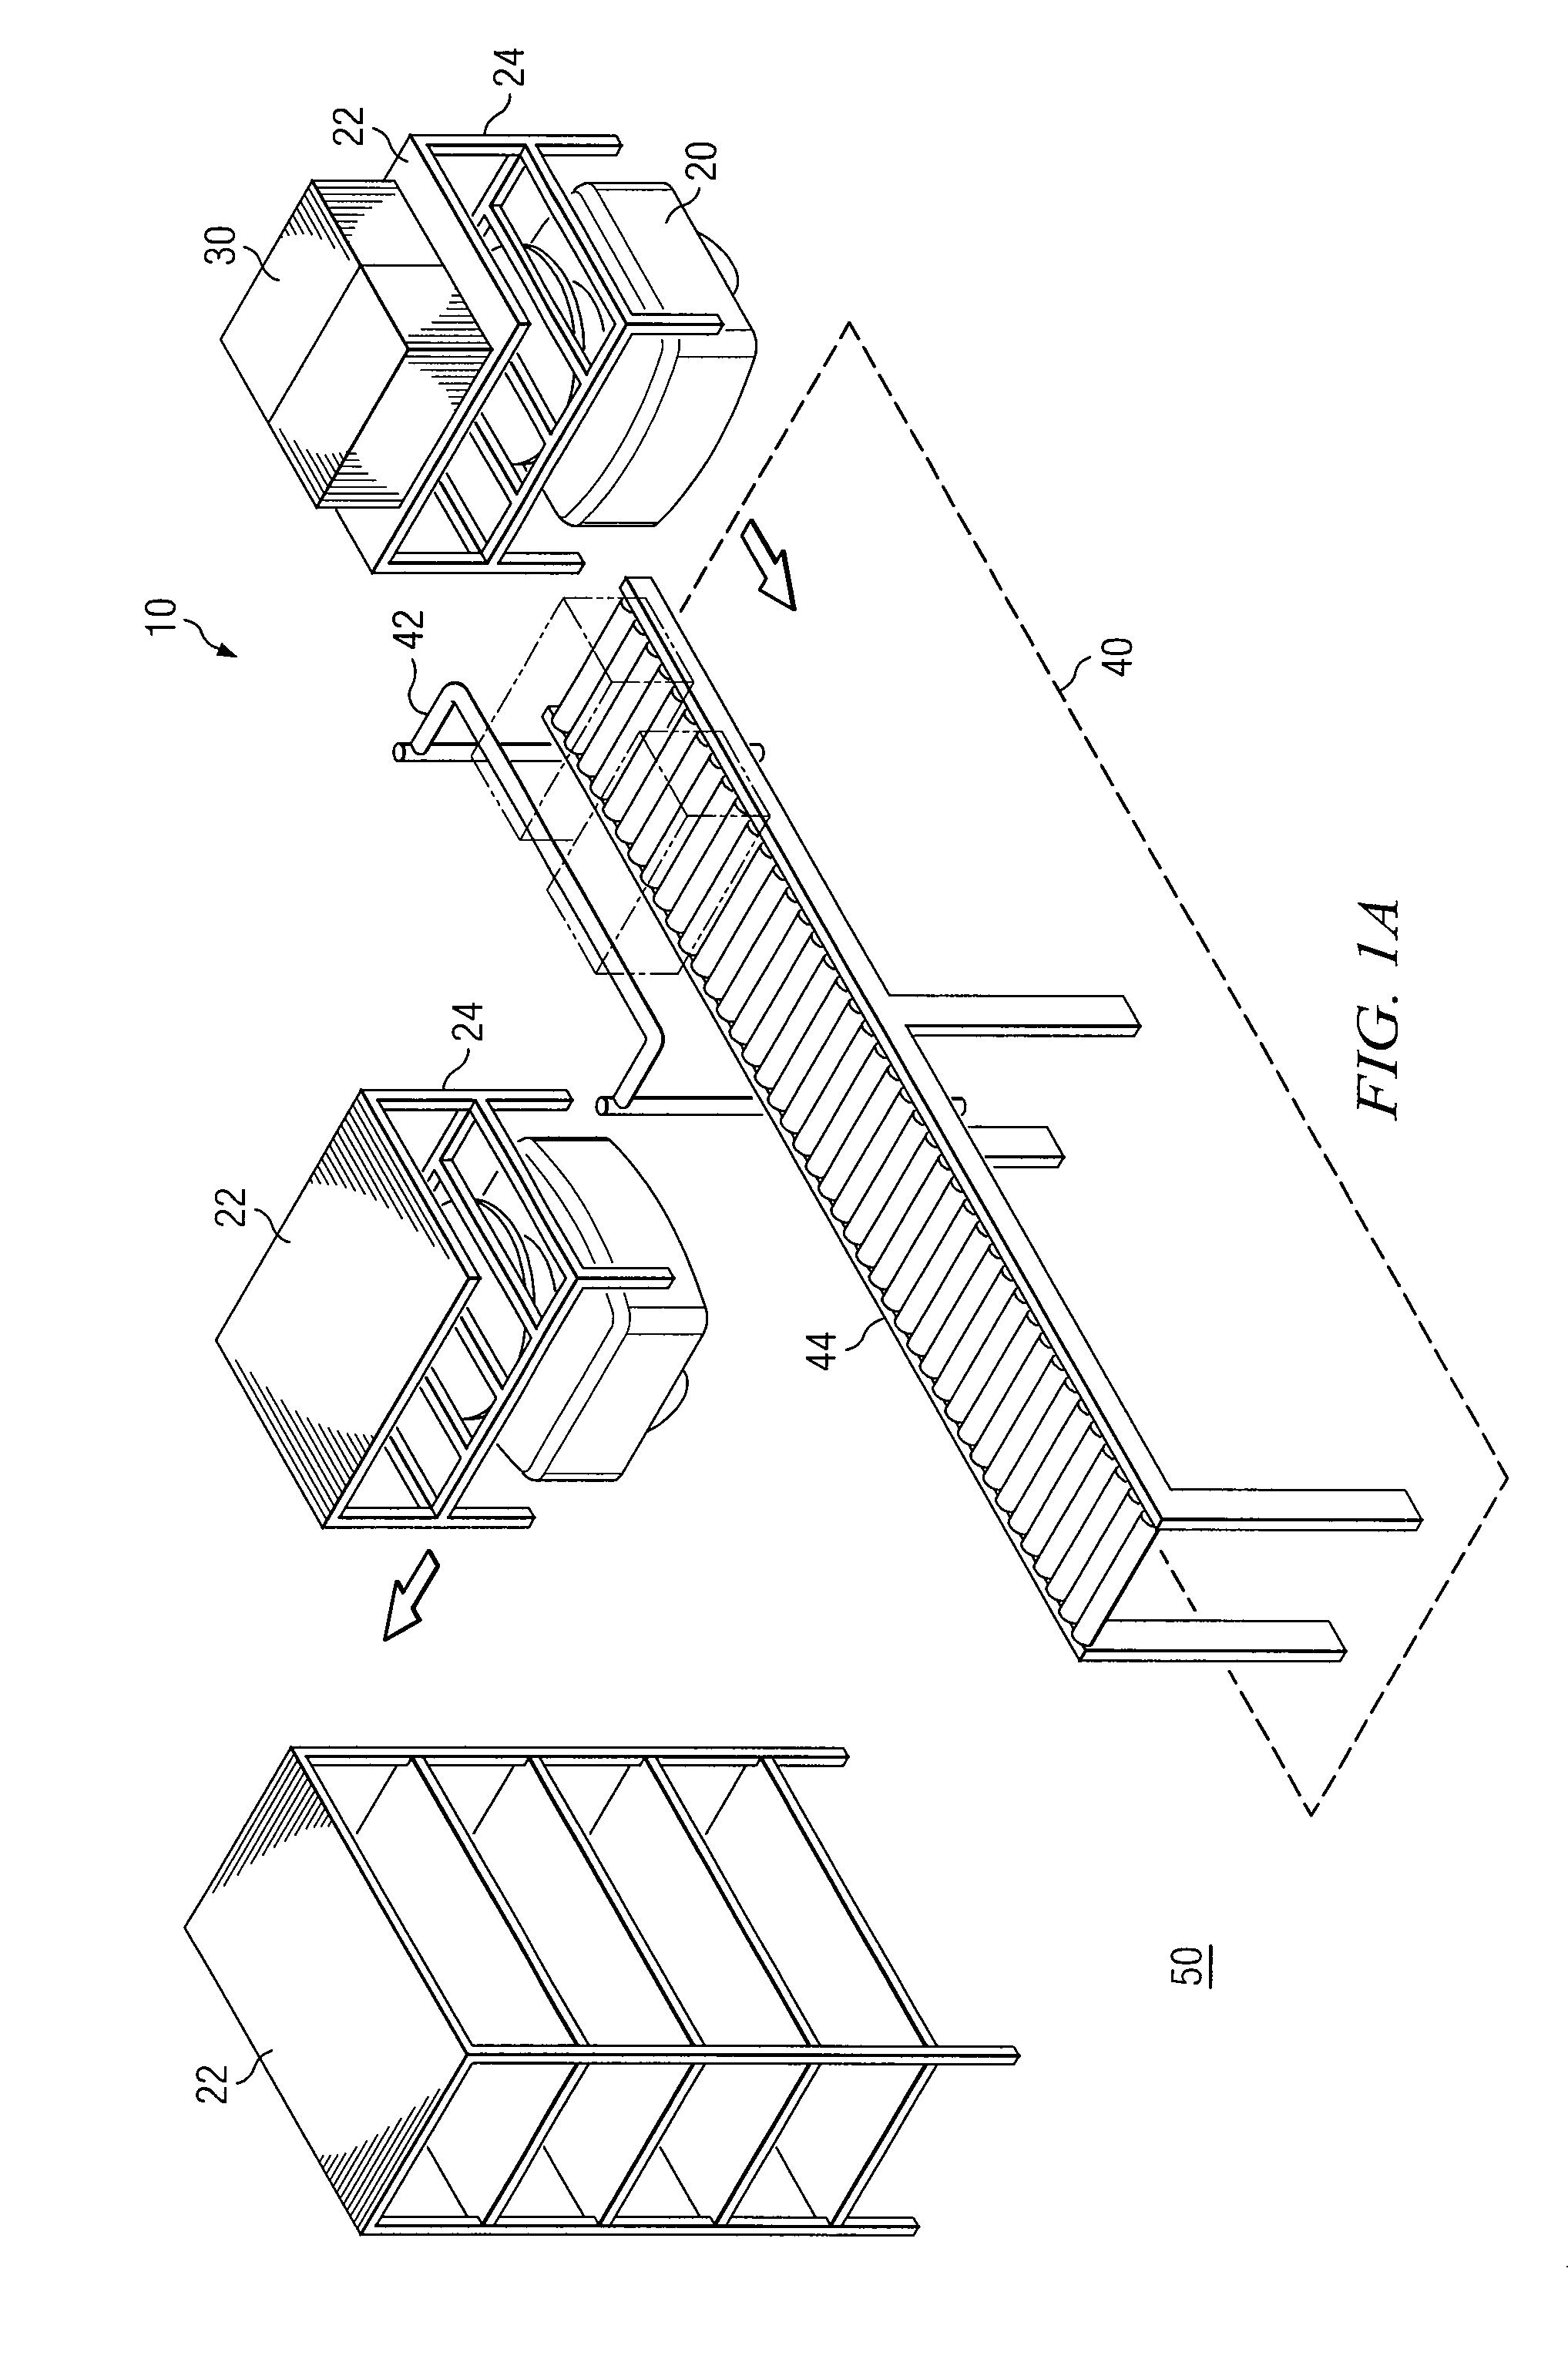 System and method for unloading items